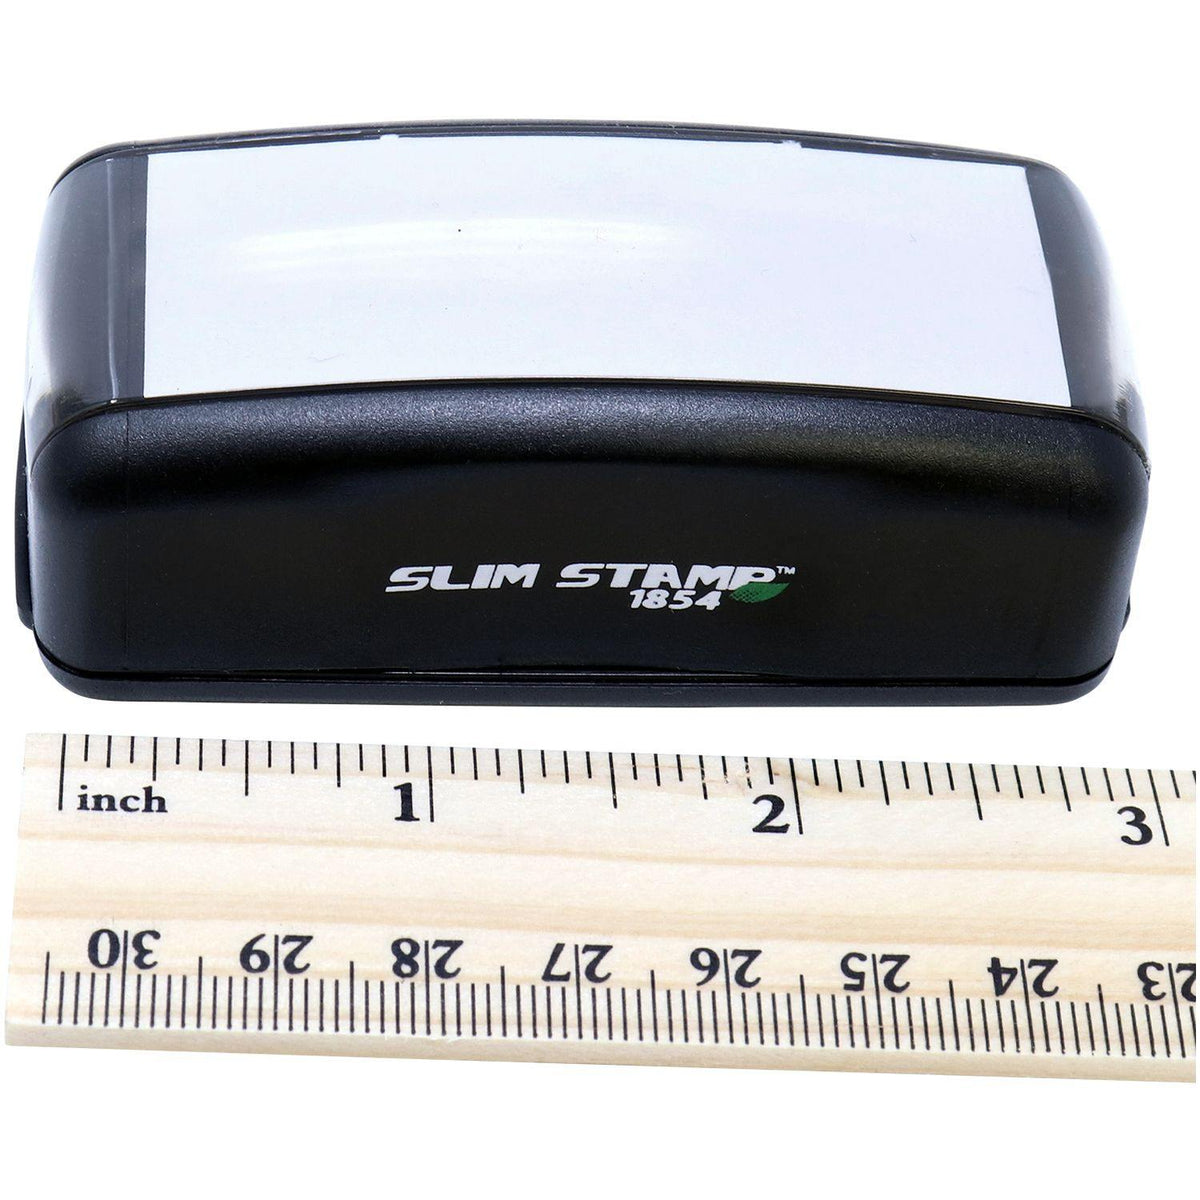 Measurement Large Pre-Inked Standard Mail B Stamp with Ruler